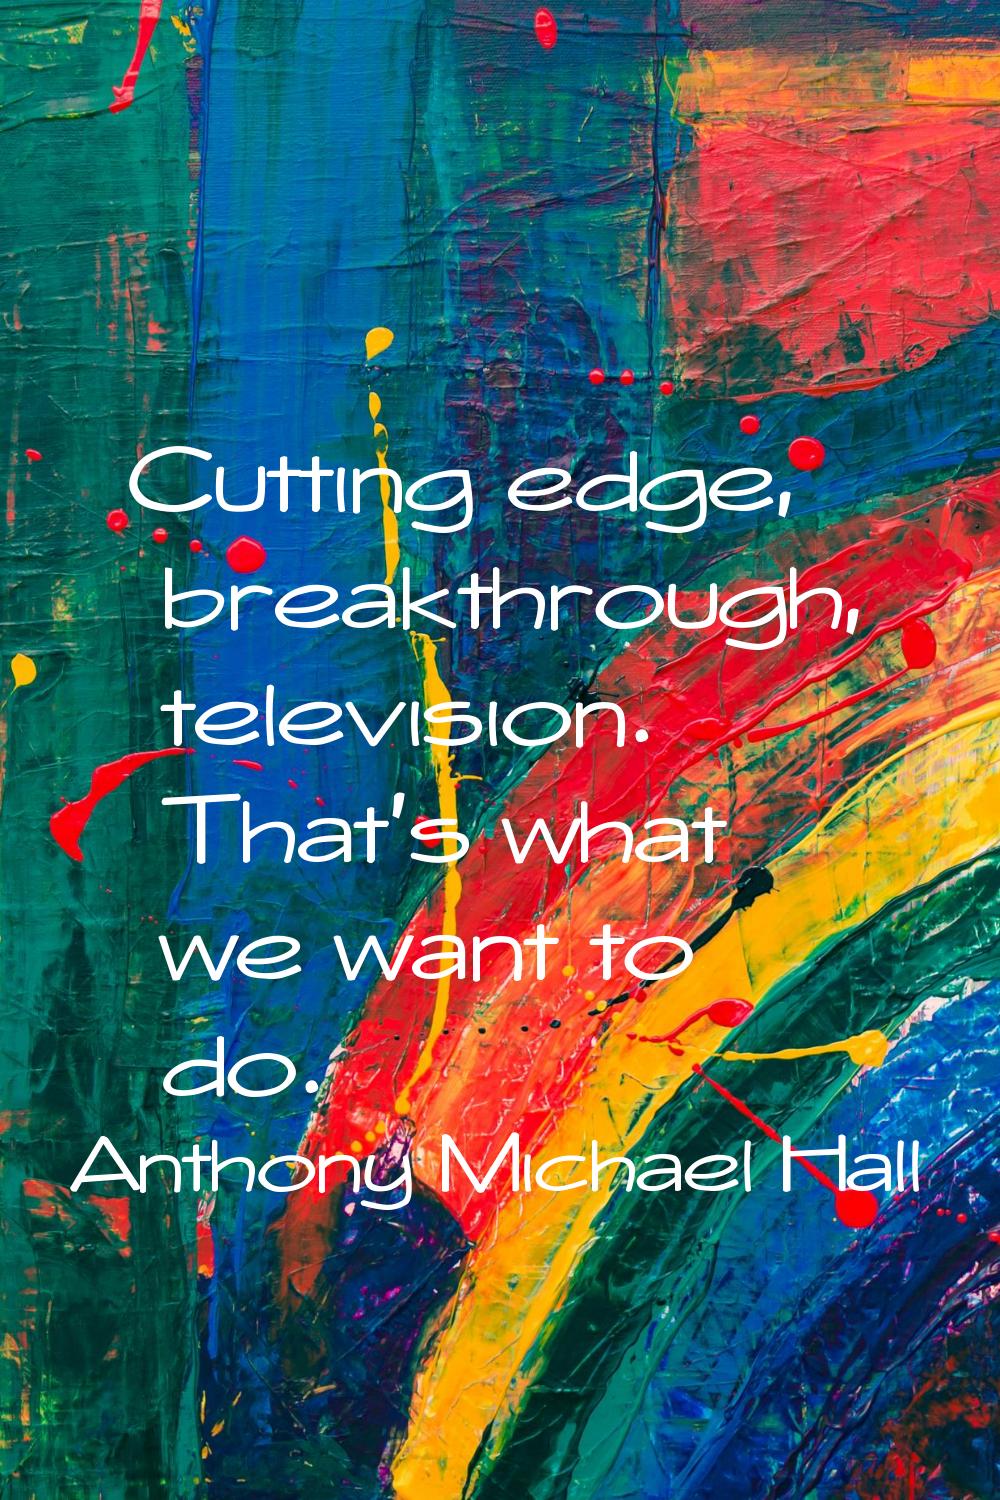 Cutting edge, breakthrough, television. That's what we want to do.